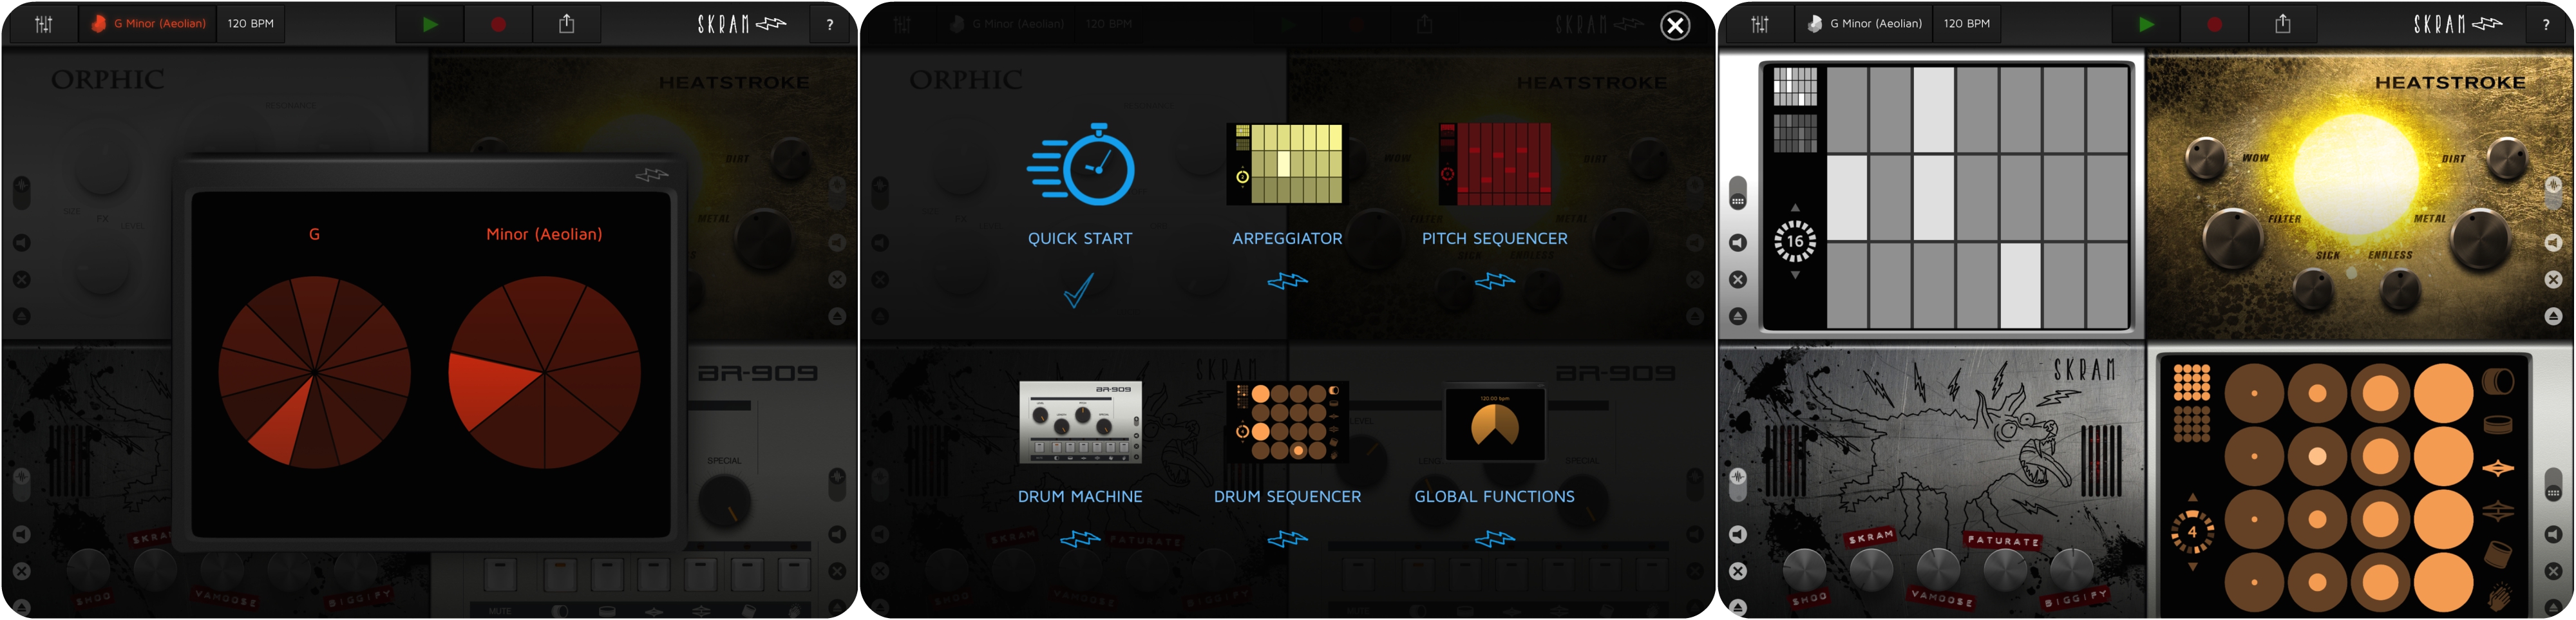 Skram – New iOS App From Creators of Tech Used By Daft Punk and Bjork